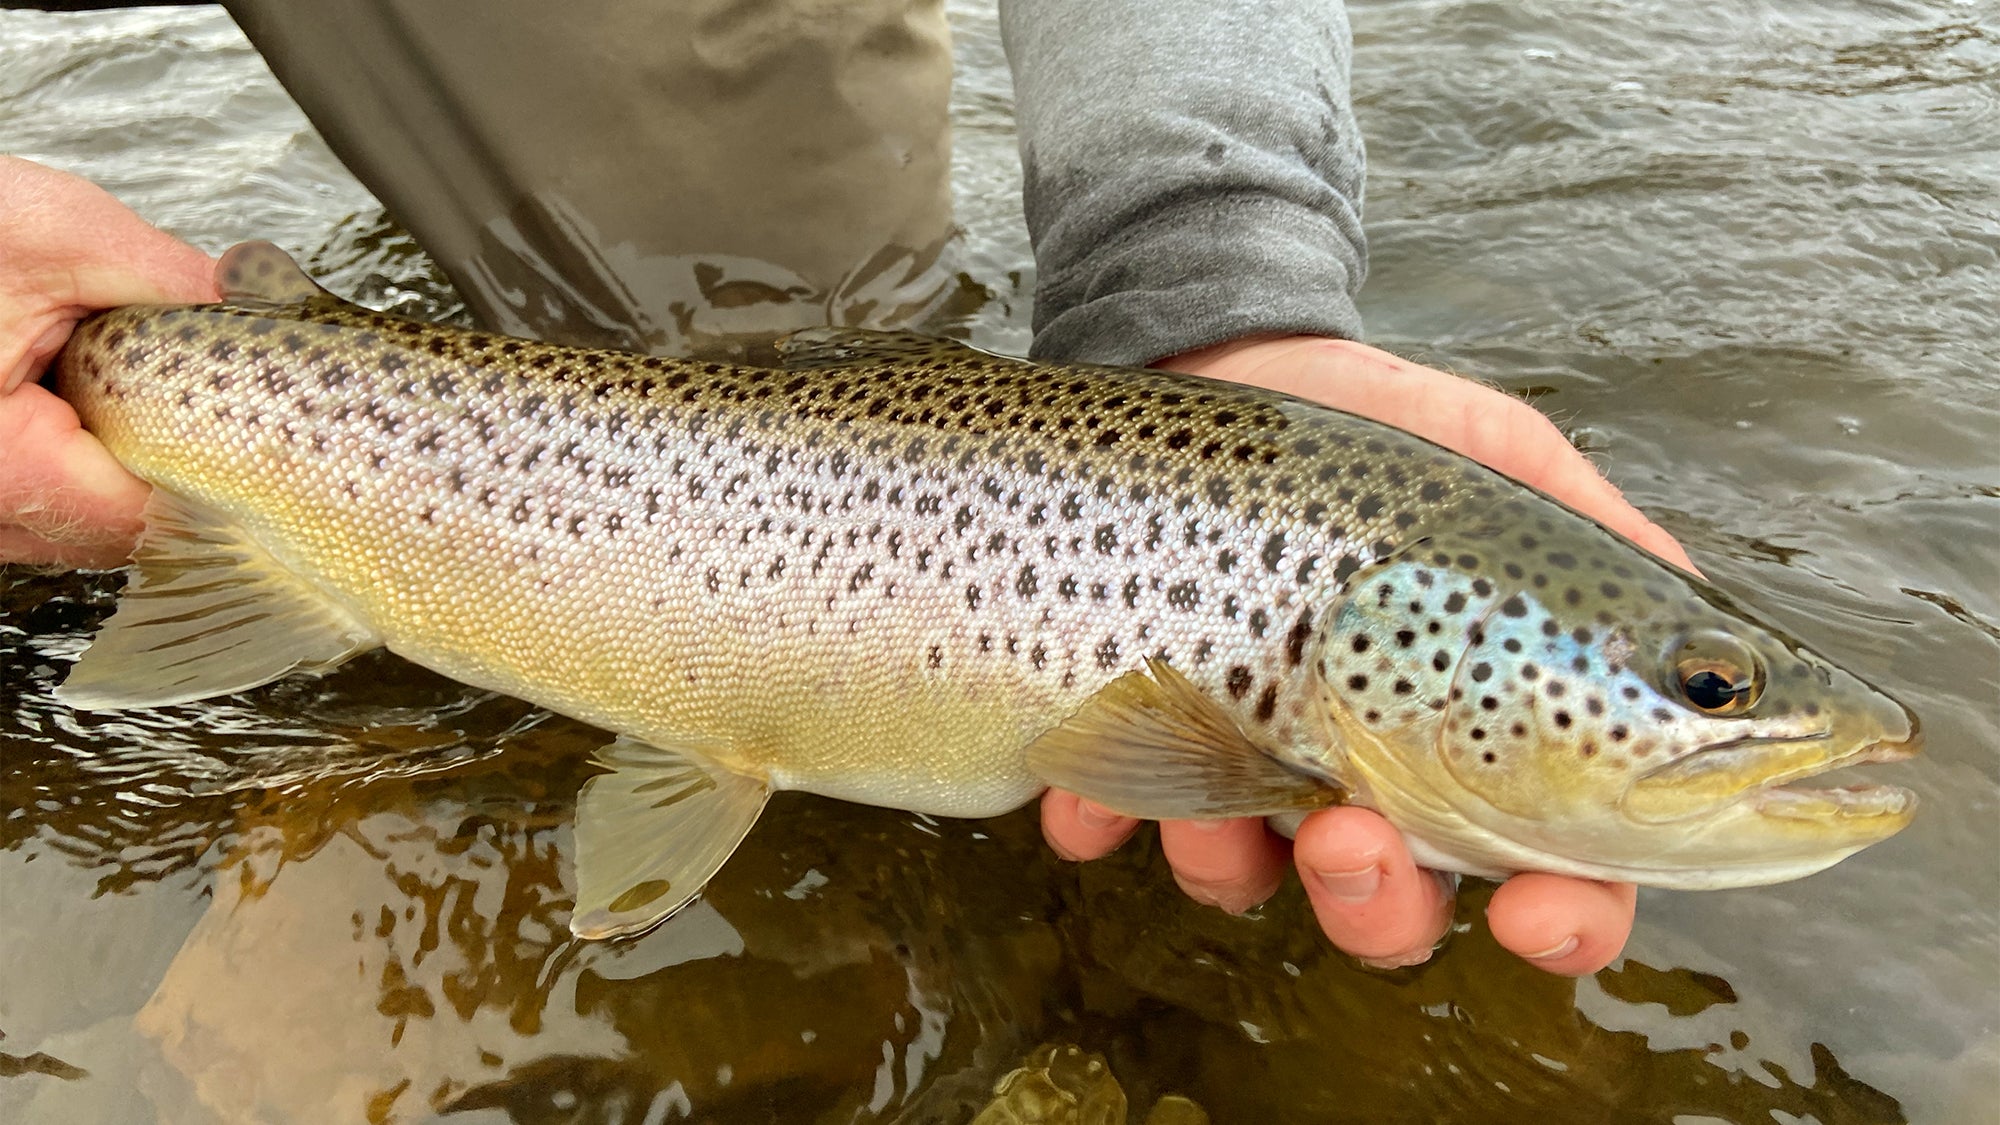 Is trout fishing difficult? Can I catch rainbow trout without fly fishing?  - Quora